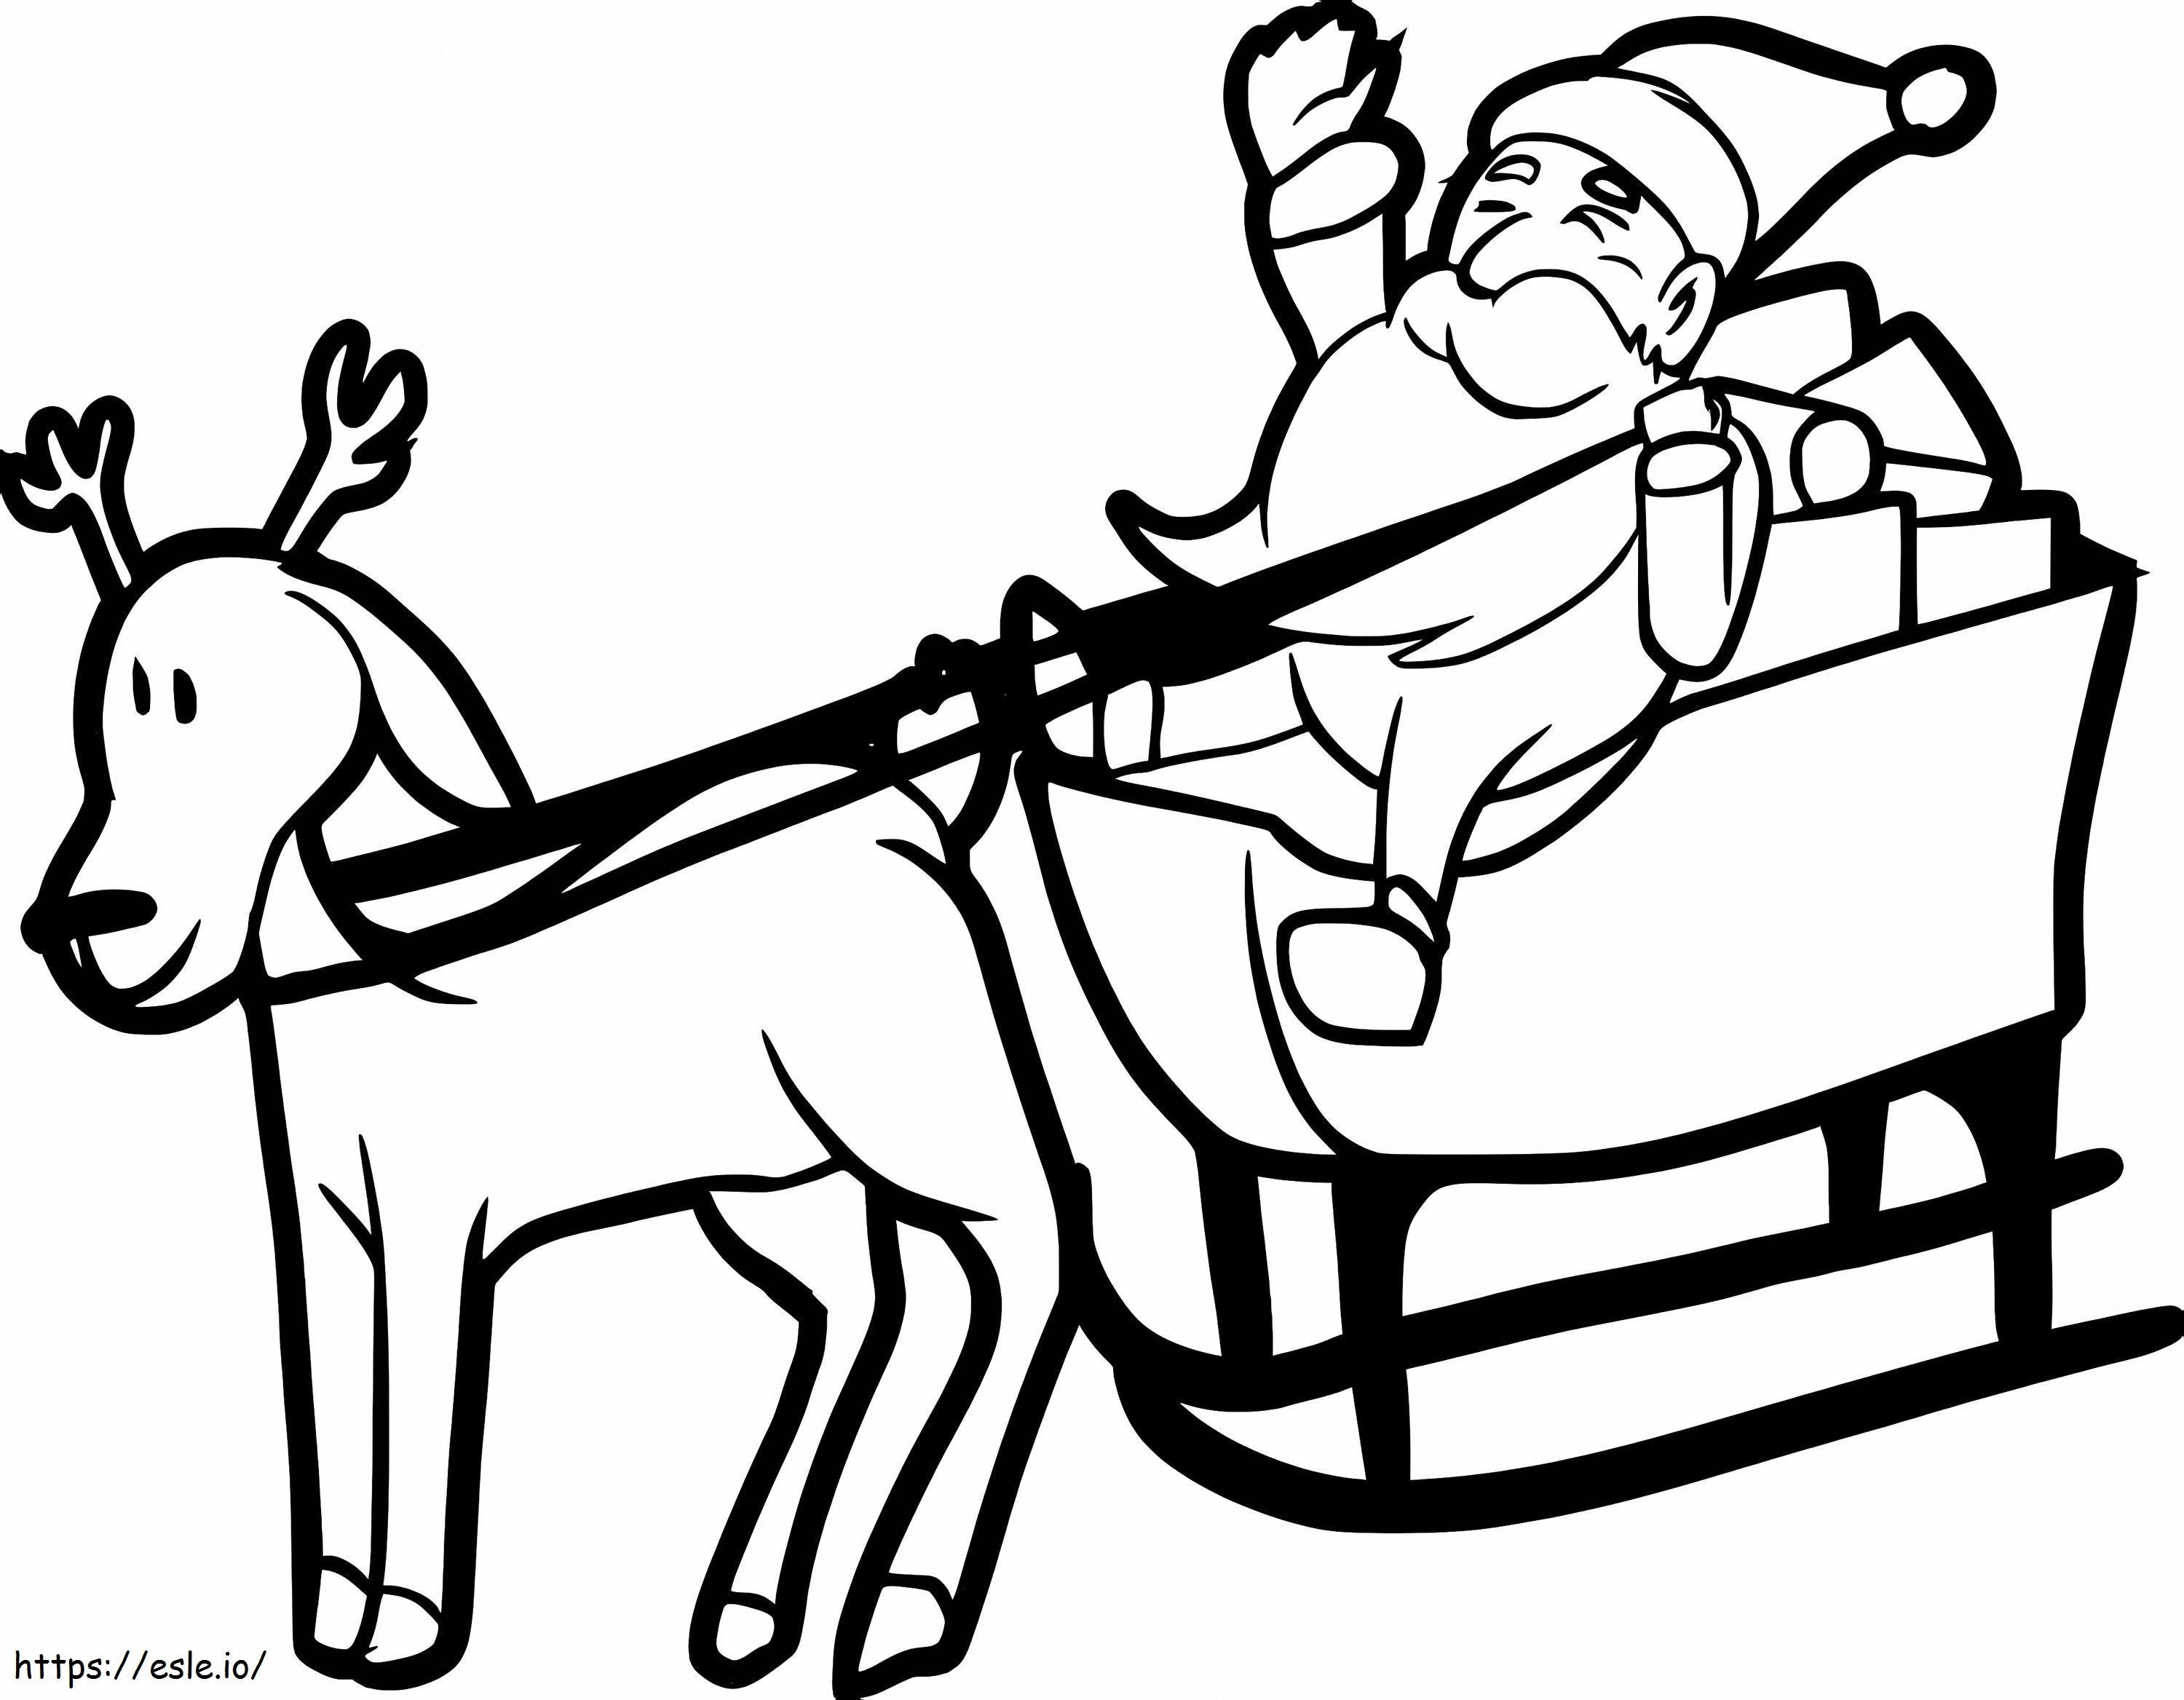 Santa Claus On His Sleigh With A Reindeer coloring page